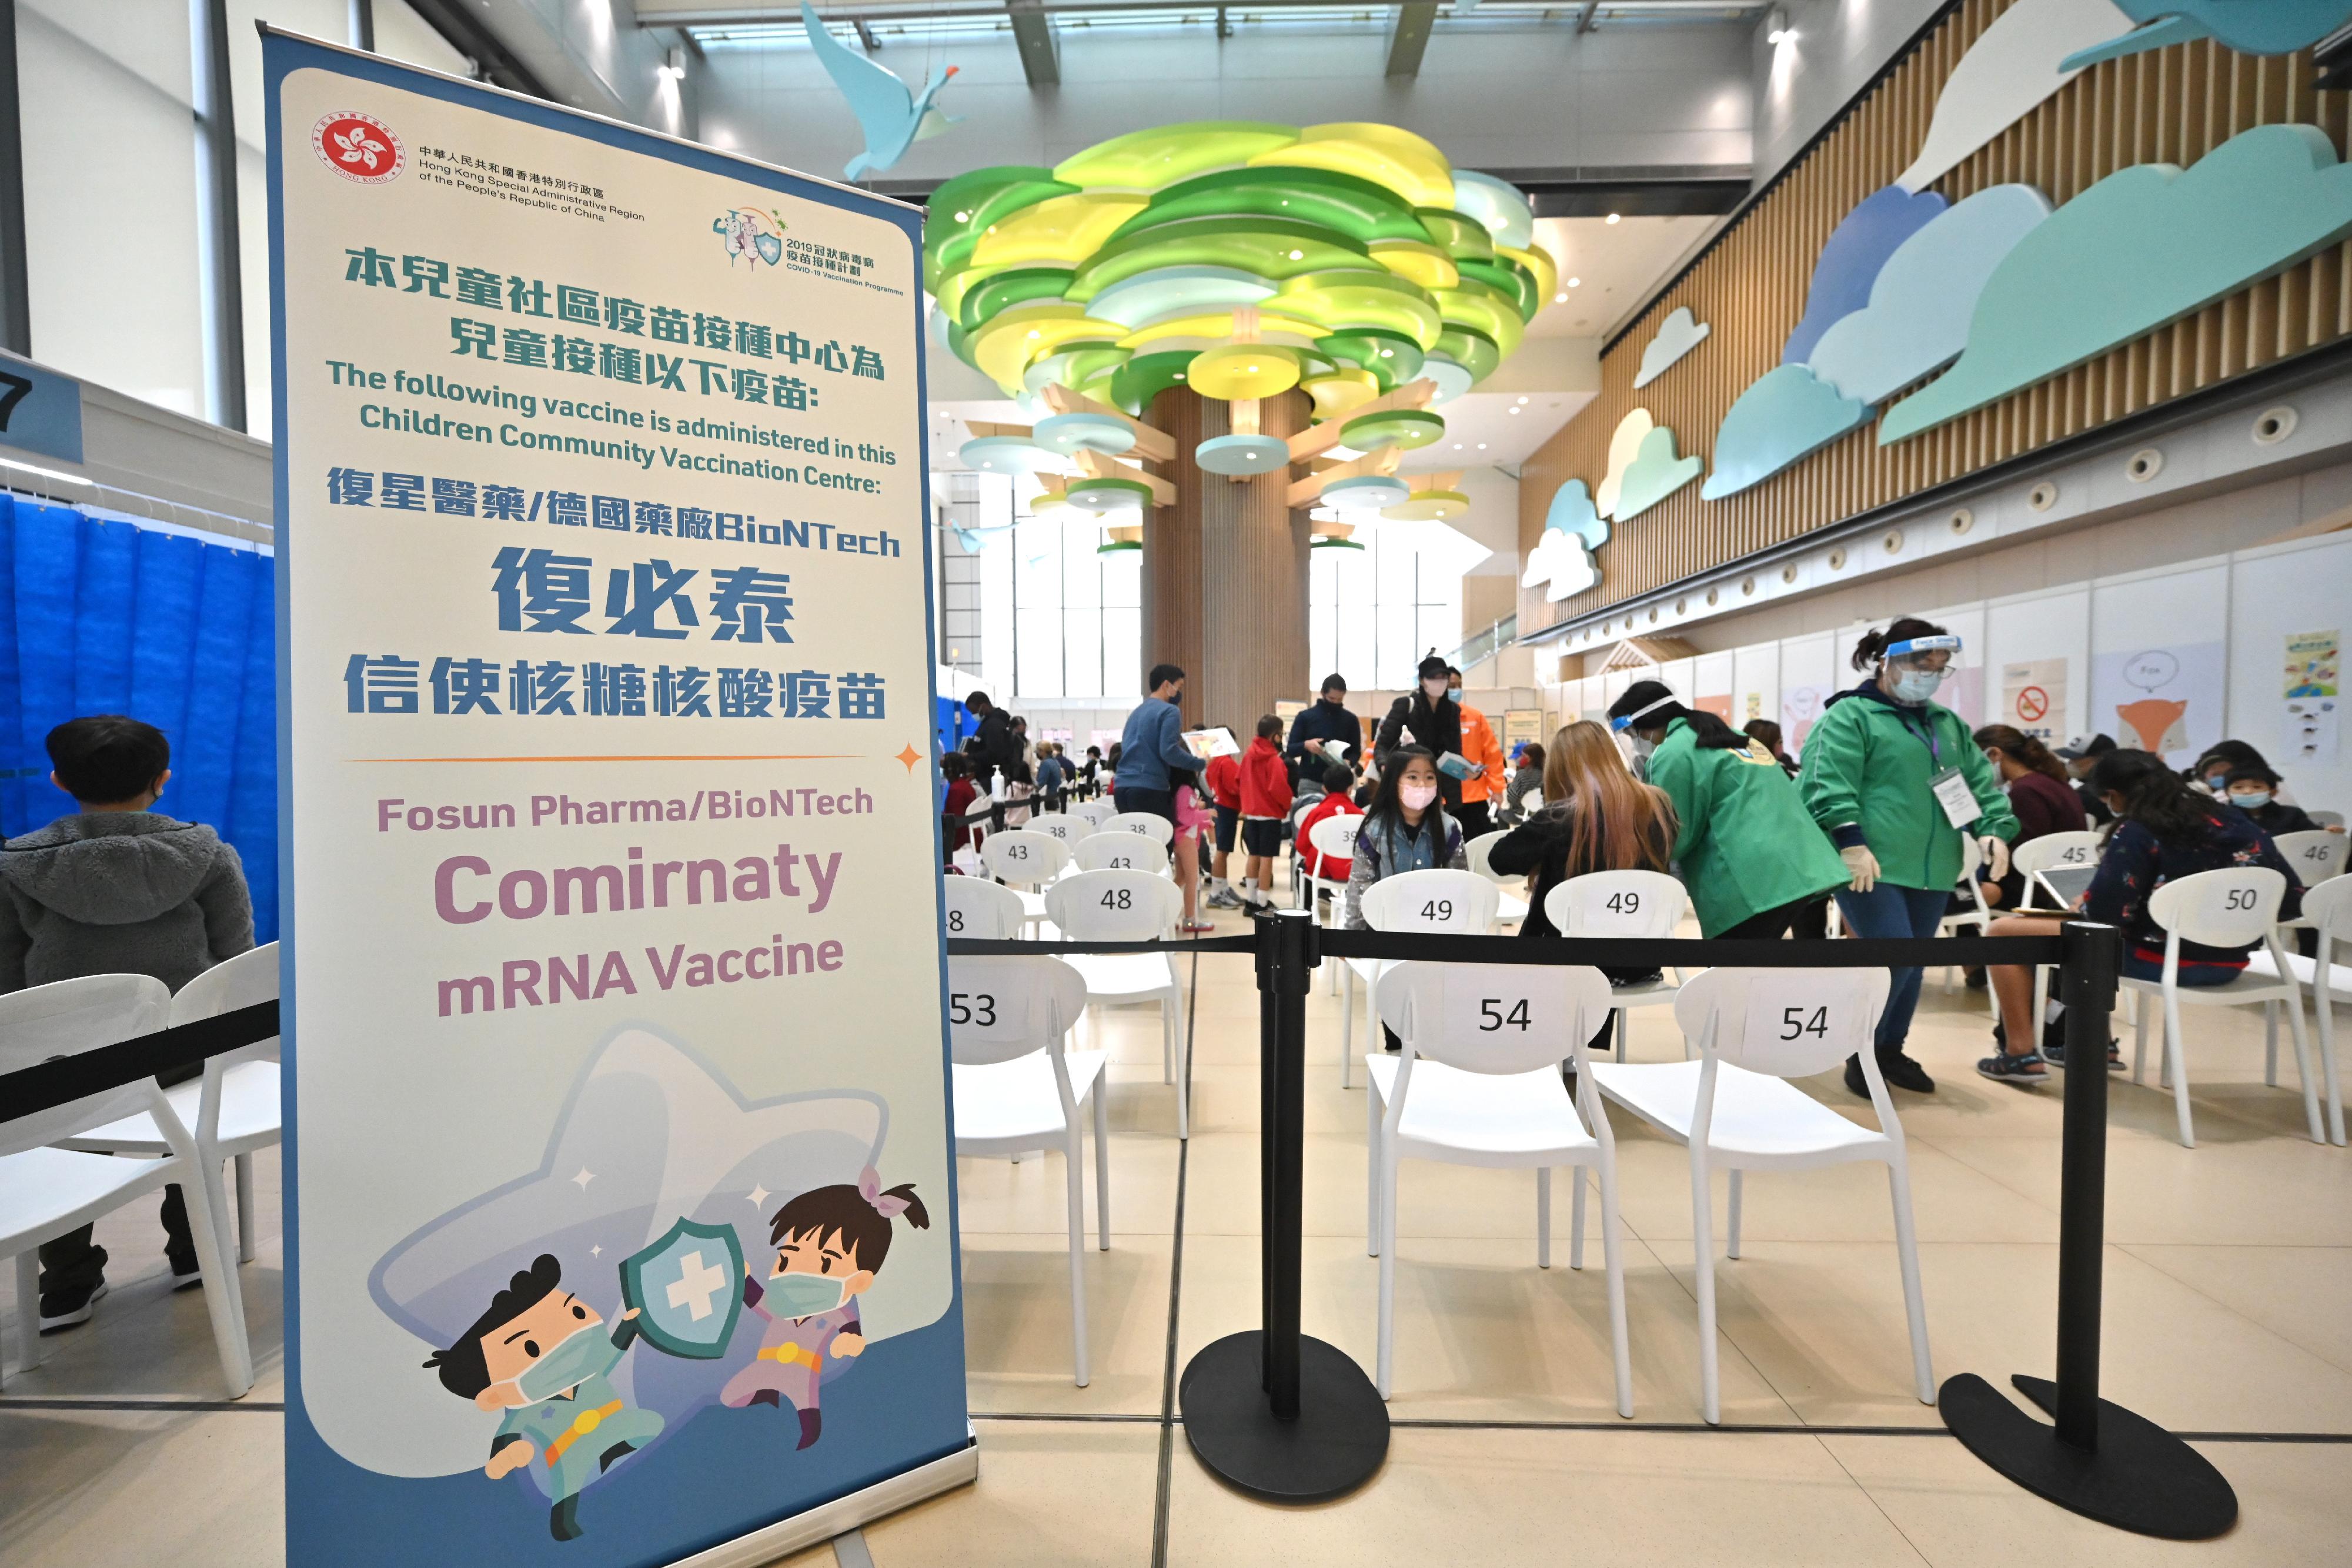 The Children Community Vaccination Centre at Hong Kong Children's Hospital in Kowloon Bay came into operation today (February 16) to provide the BioNTech vaccination service to children aged 5 to 11. Photo shows children and their parents/guardians at the waiting area for vaccination.